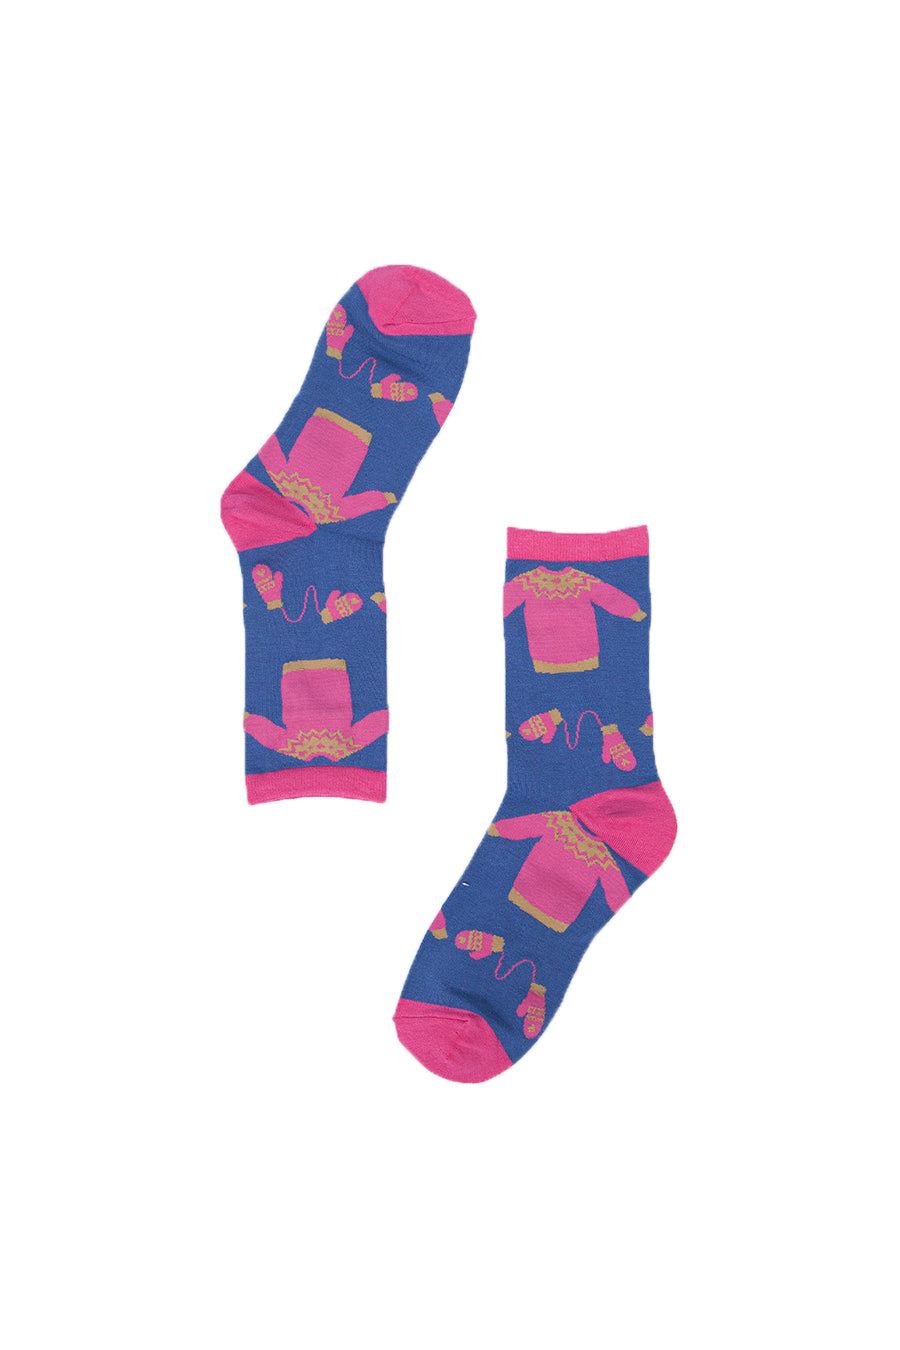 blue, pink ankle socks with a xmas jumper pattern